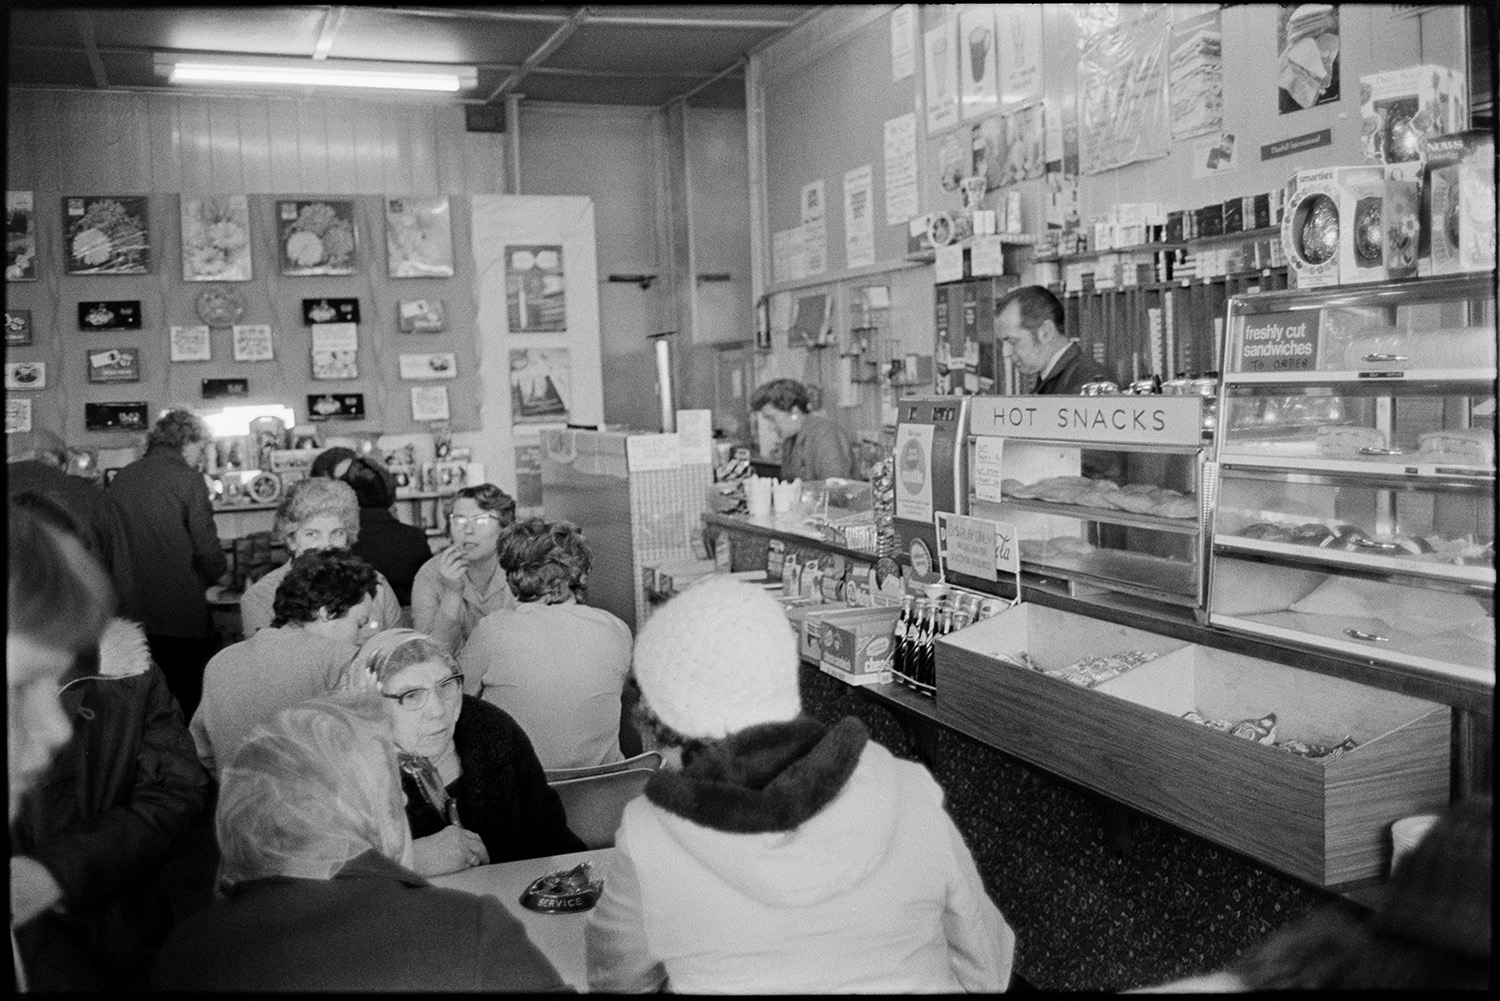 Cafe with bar and customers. 
[People sat in a cafe in Okehampton. A man and woman are preparing food and drink behind the counter. Bottled drinks and hot snacks are displayed on the counter and in the background posters or prints are hung on the wall.]